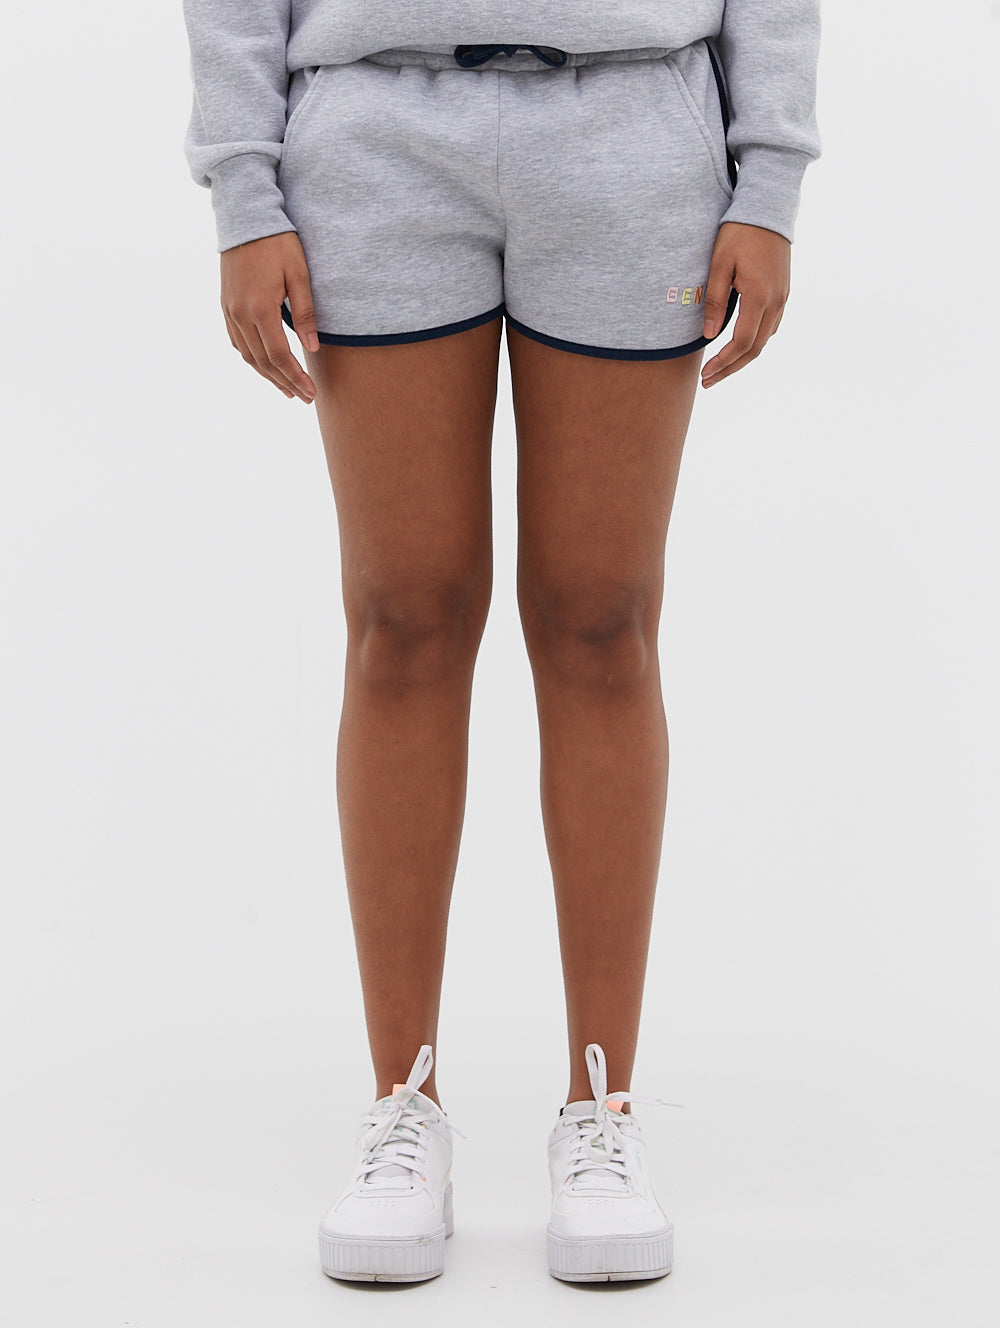 Polaire Starling Shorts - BN4R123357